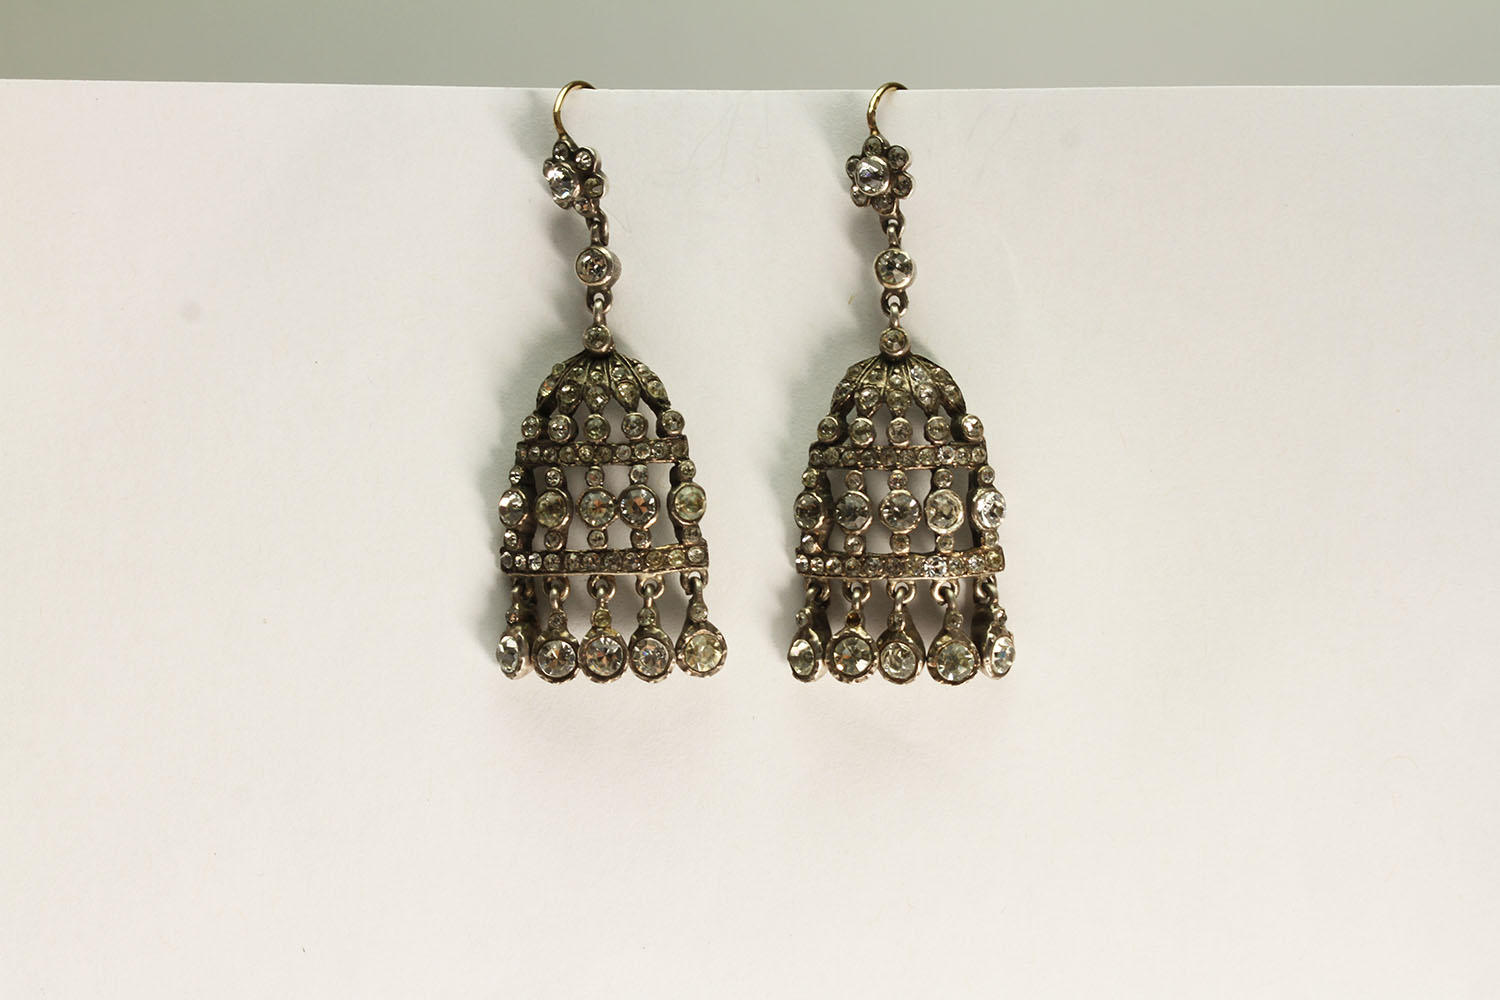 GOLD AND SILVER WHITE PASTE CHANDELIER DROP EARRINGS, 3.3X2.2CMS,on gold wires.